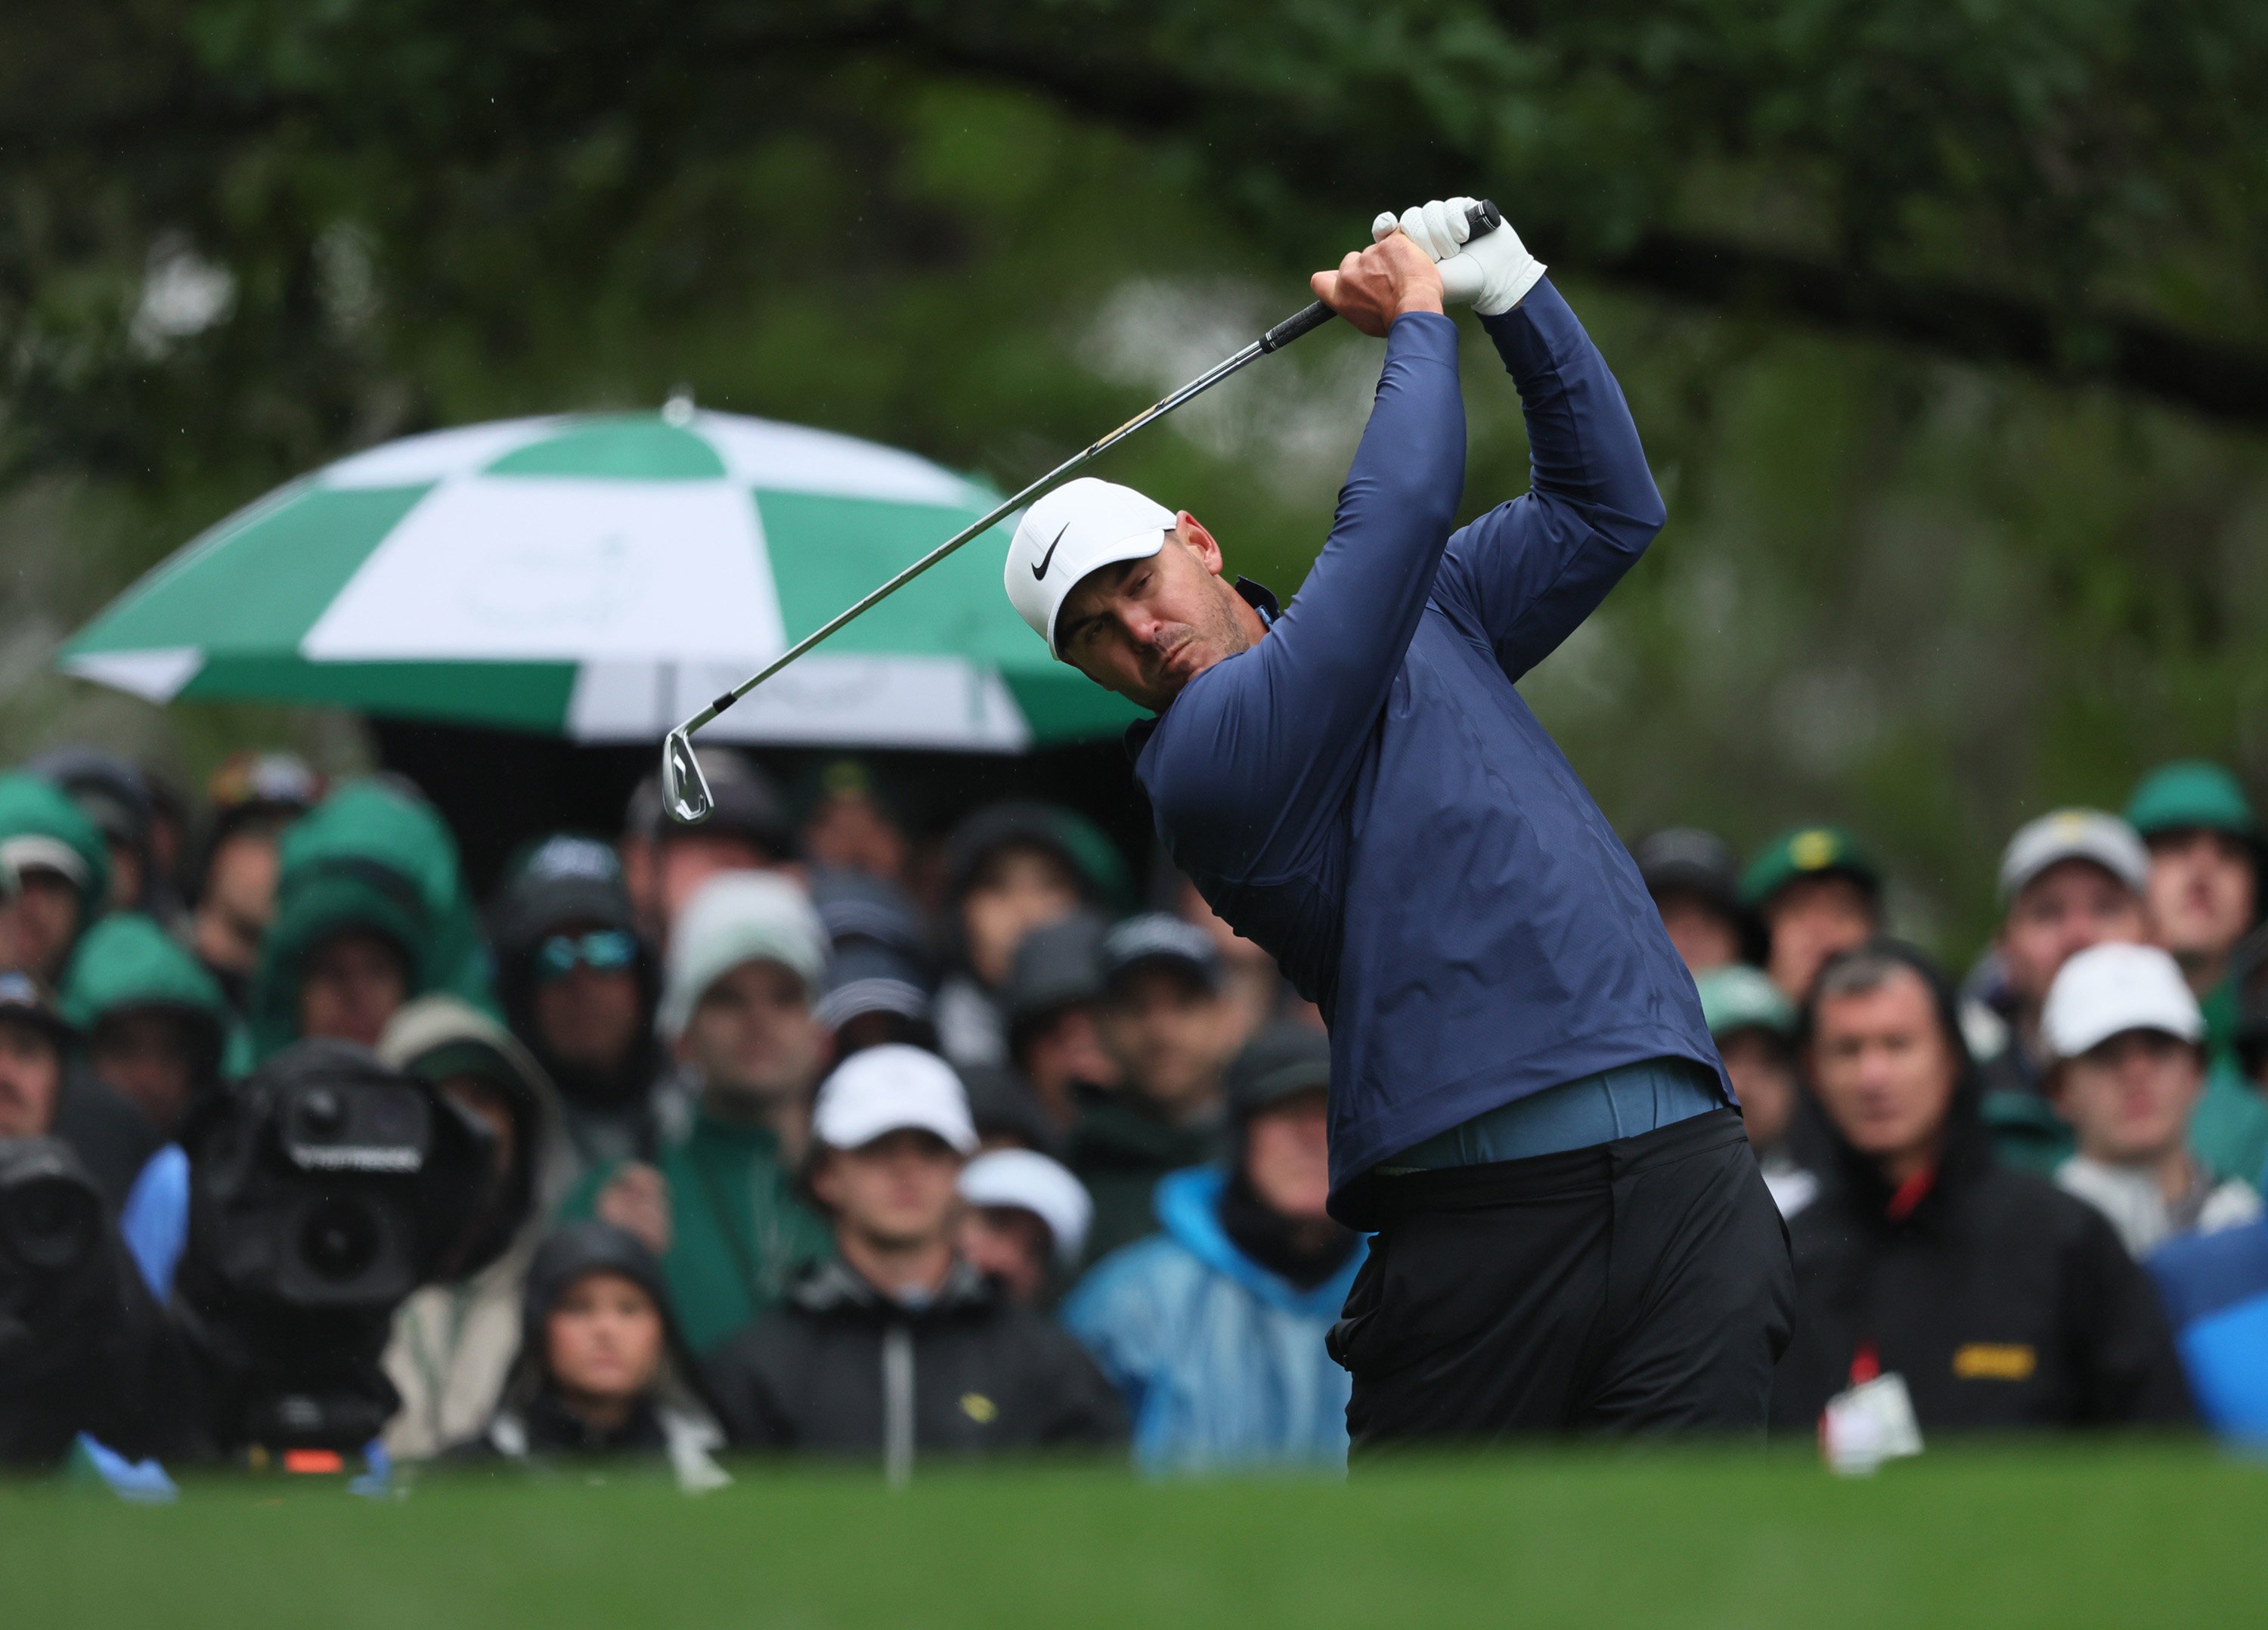 Brooks Koepka tees off on the fourth hole during a rain-disrupted third round of the Masters. Photo: TNS